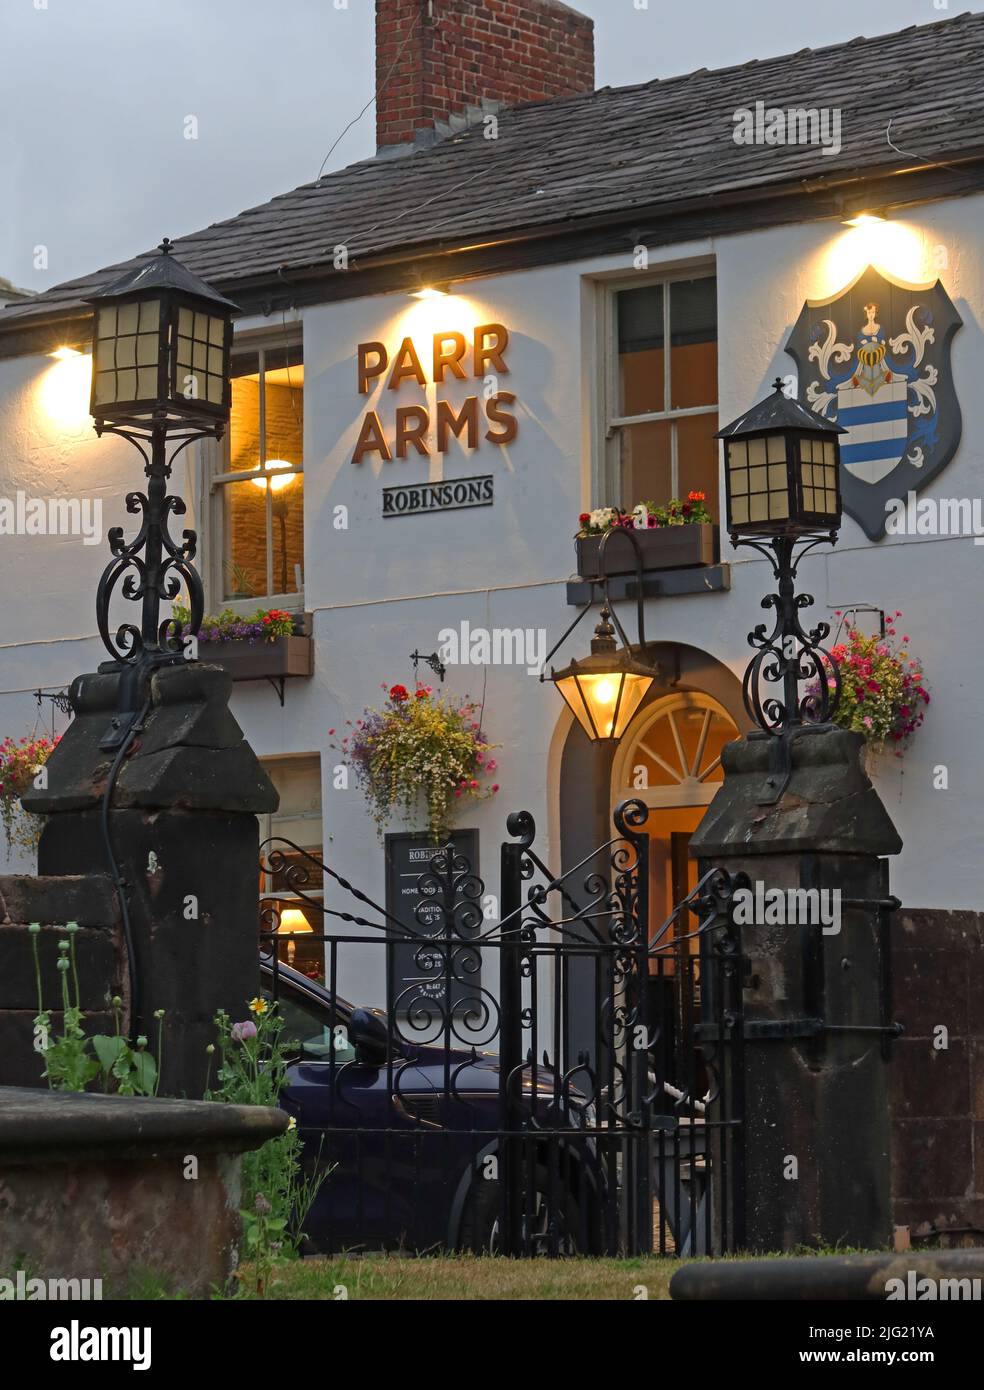 The Parr Arms, Robinsons brewery, Church Lane, Grappenhall, Warrington, Cheshire, England, UK, WA4 3EP Stock Photo